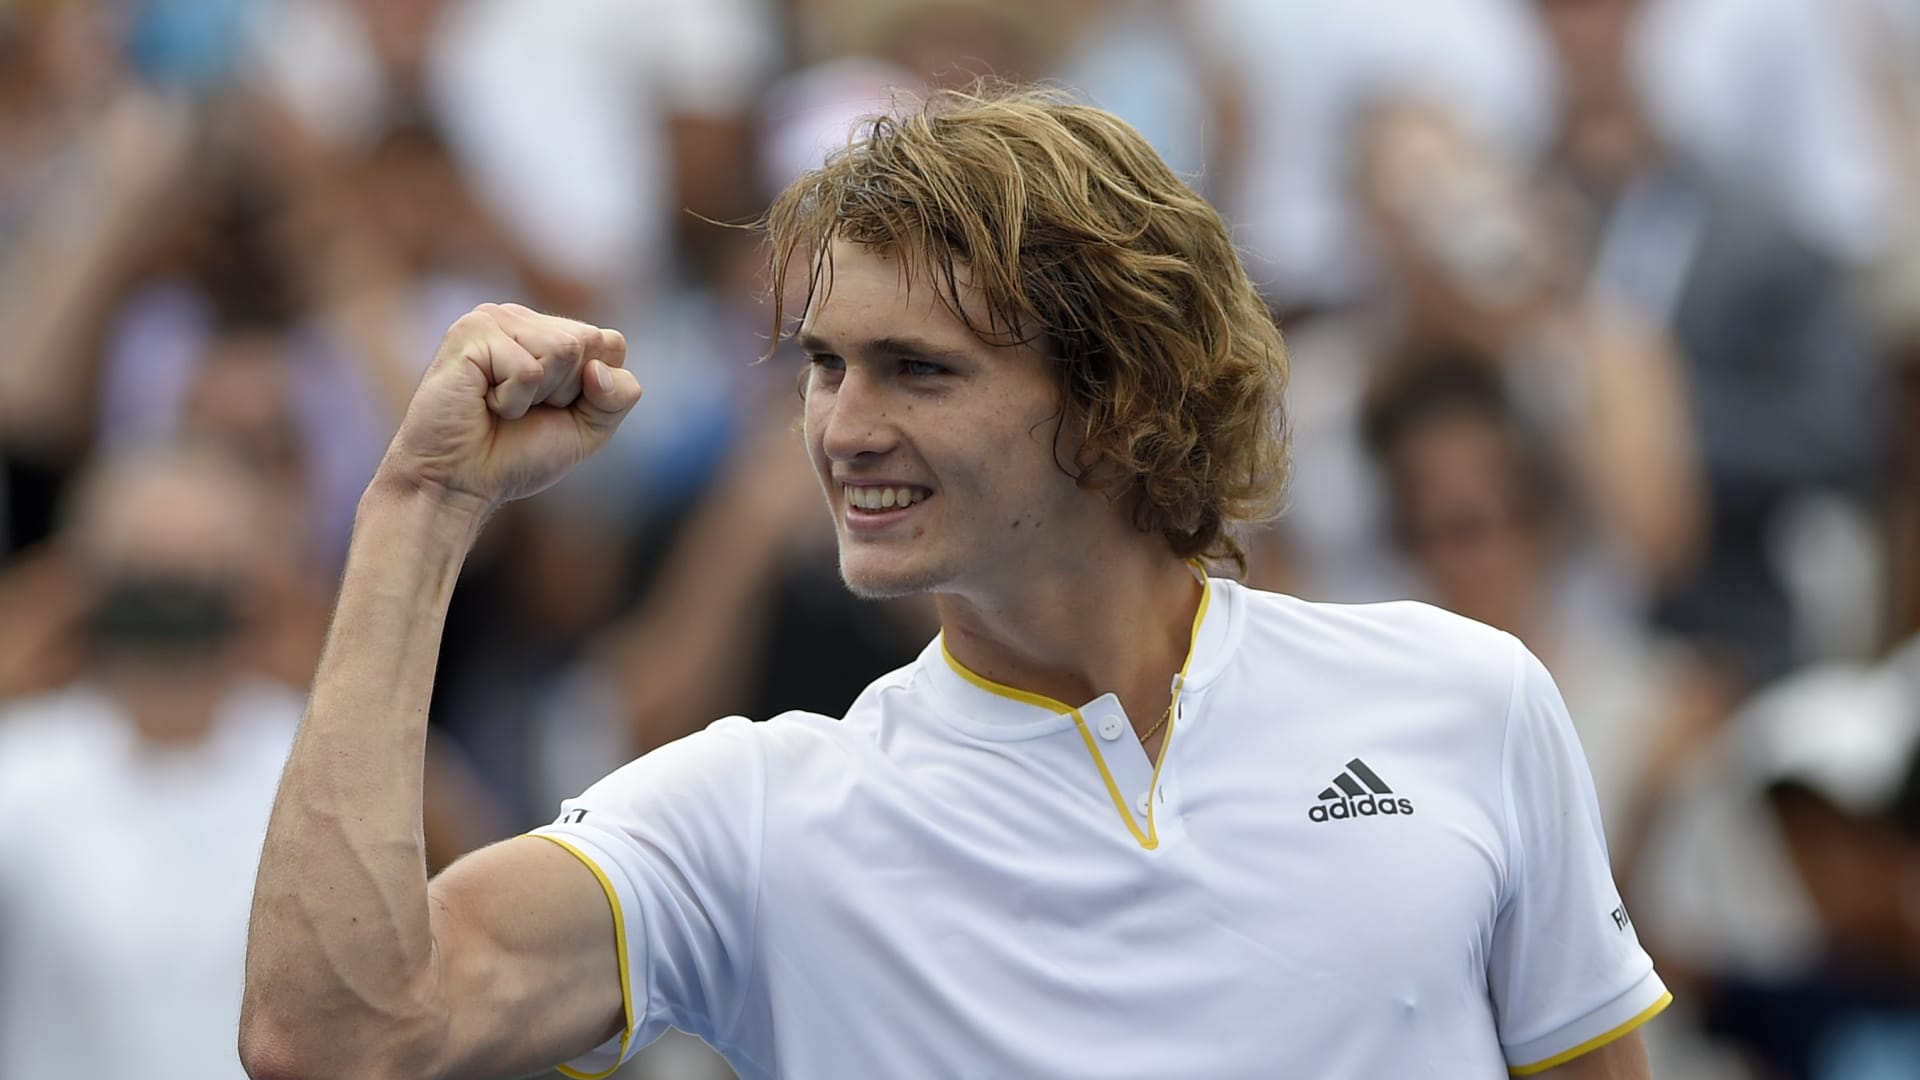 Verlichting Concessie shuttle Alexander Zverev honored to be called a future No. 1 by Federer, Nadal